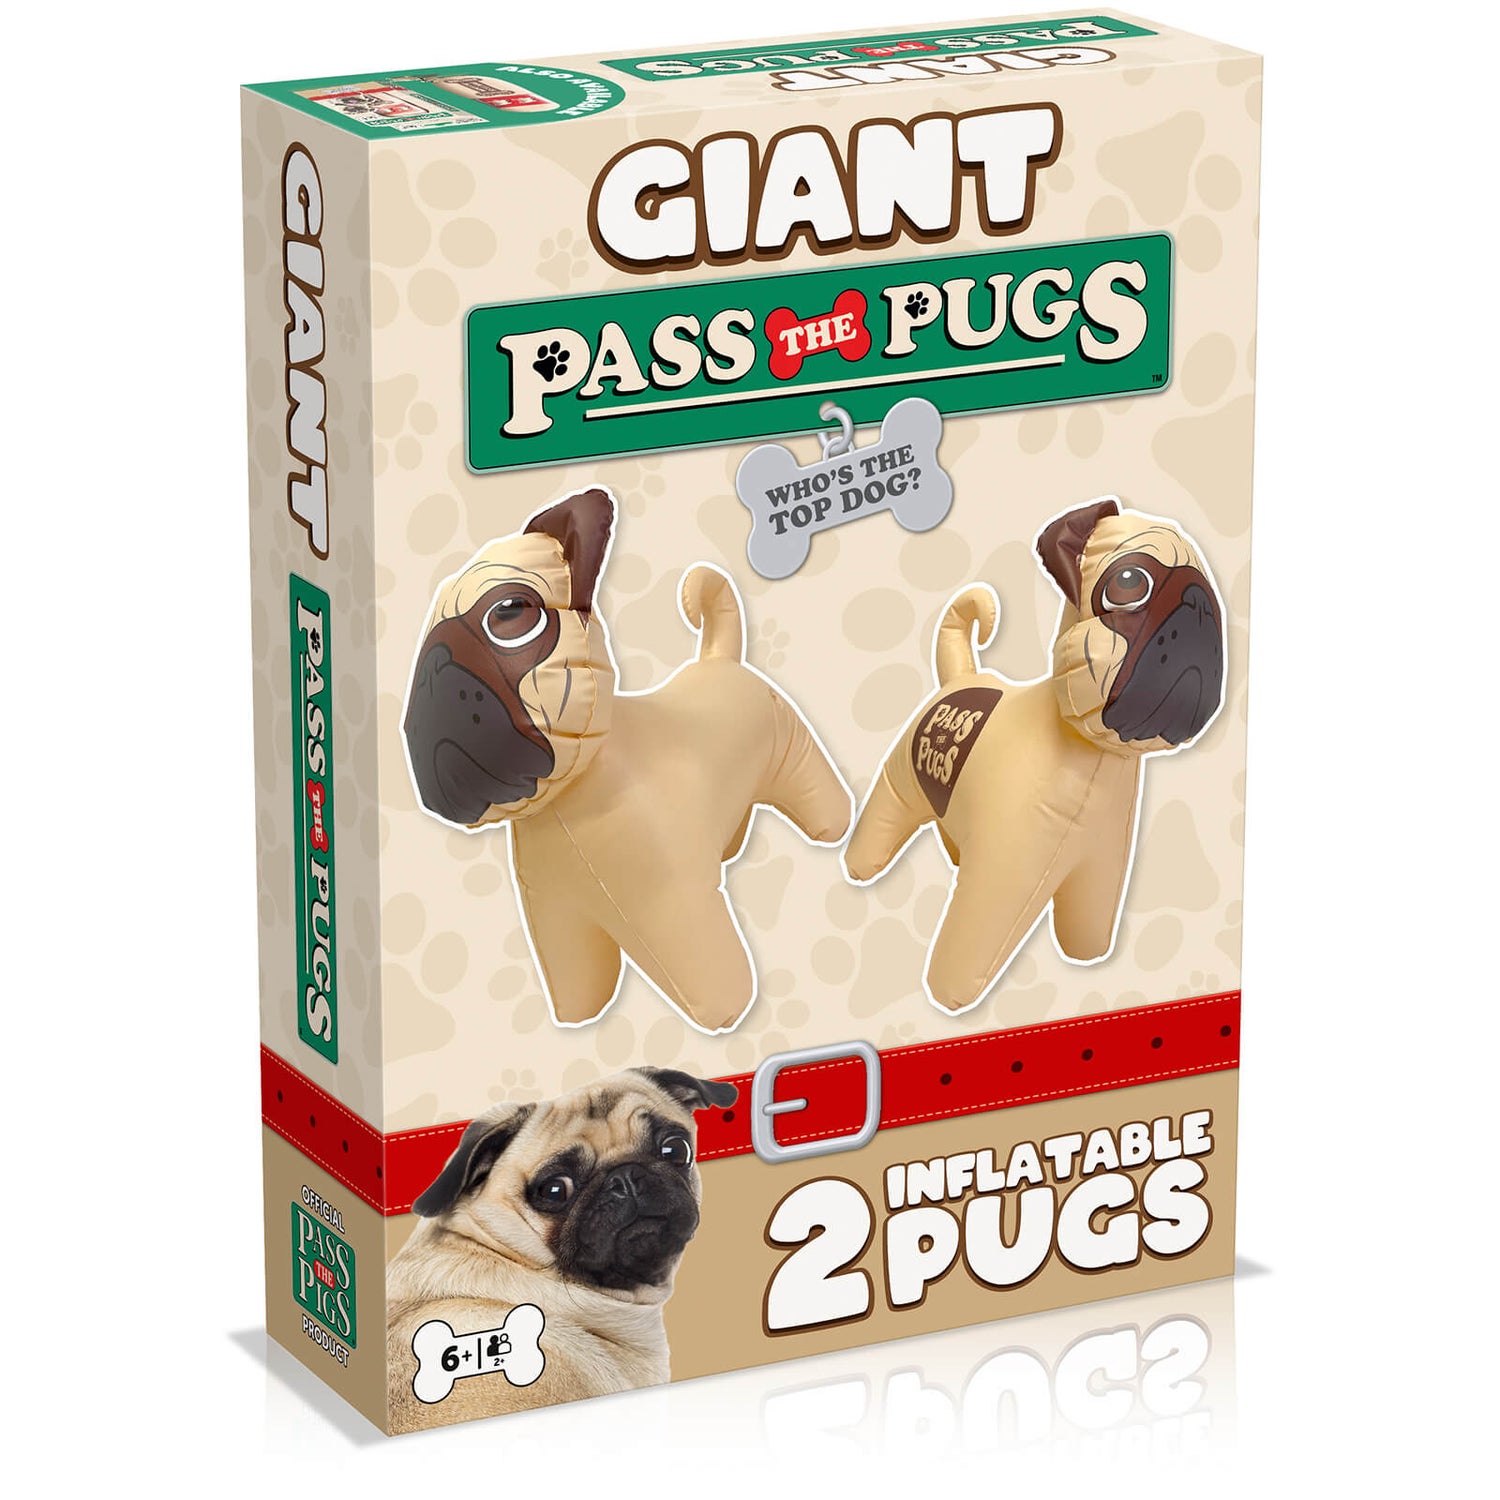 Pass the Pugs - Giant Edition